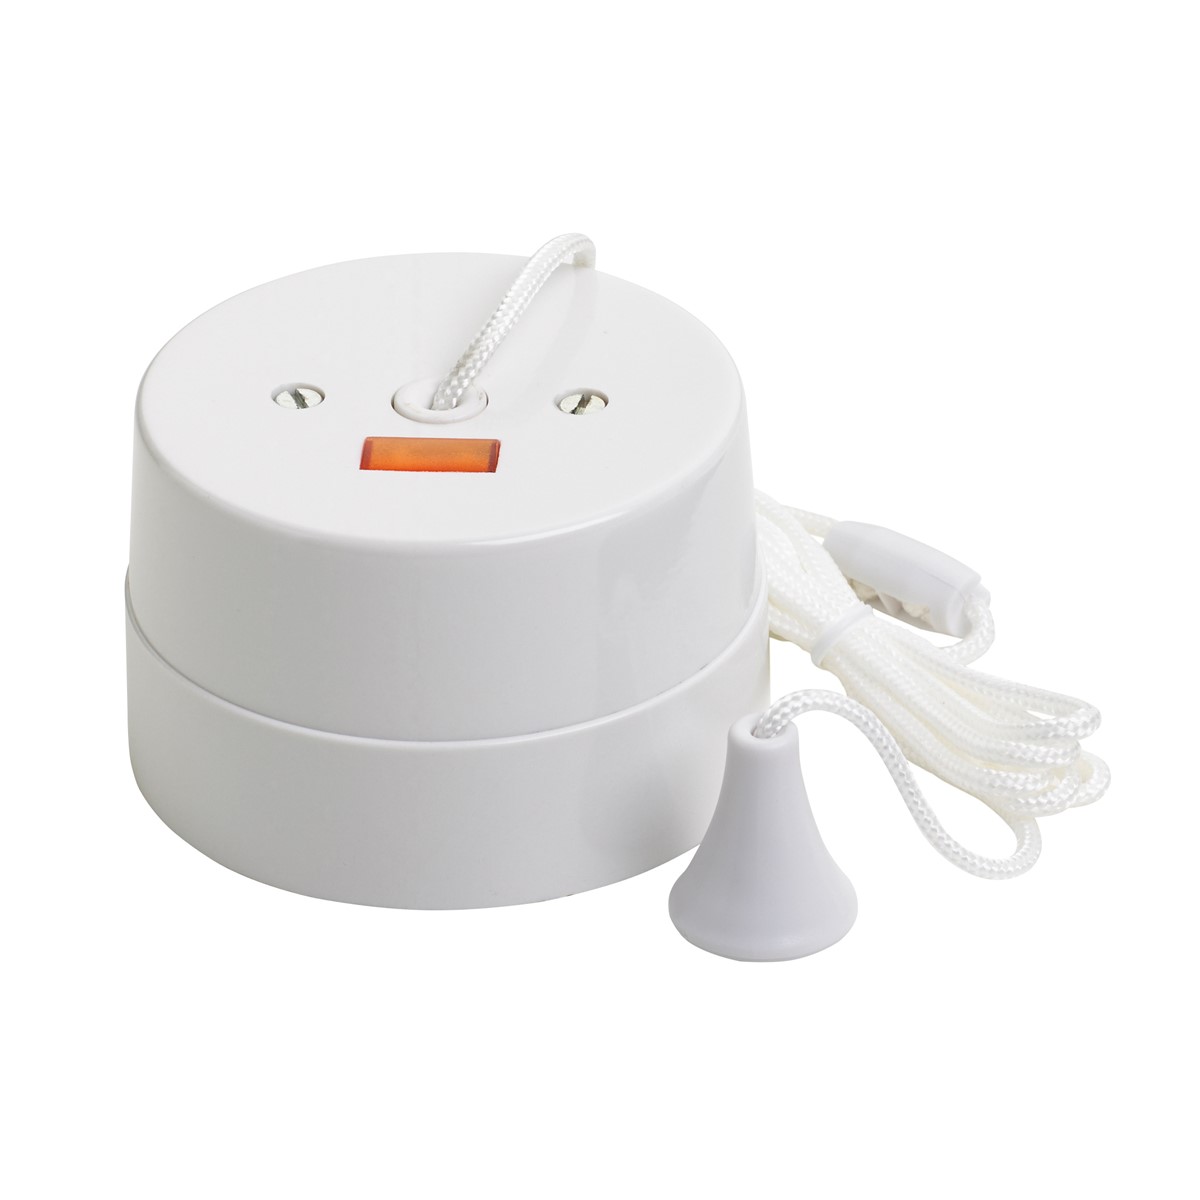 Crabtree 2163 Ceiling Switch with Pullcord & LED DP